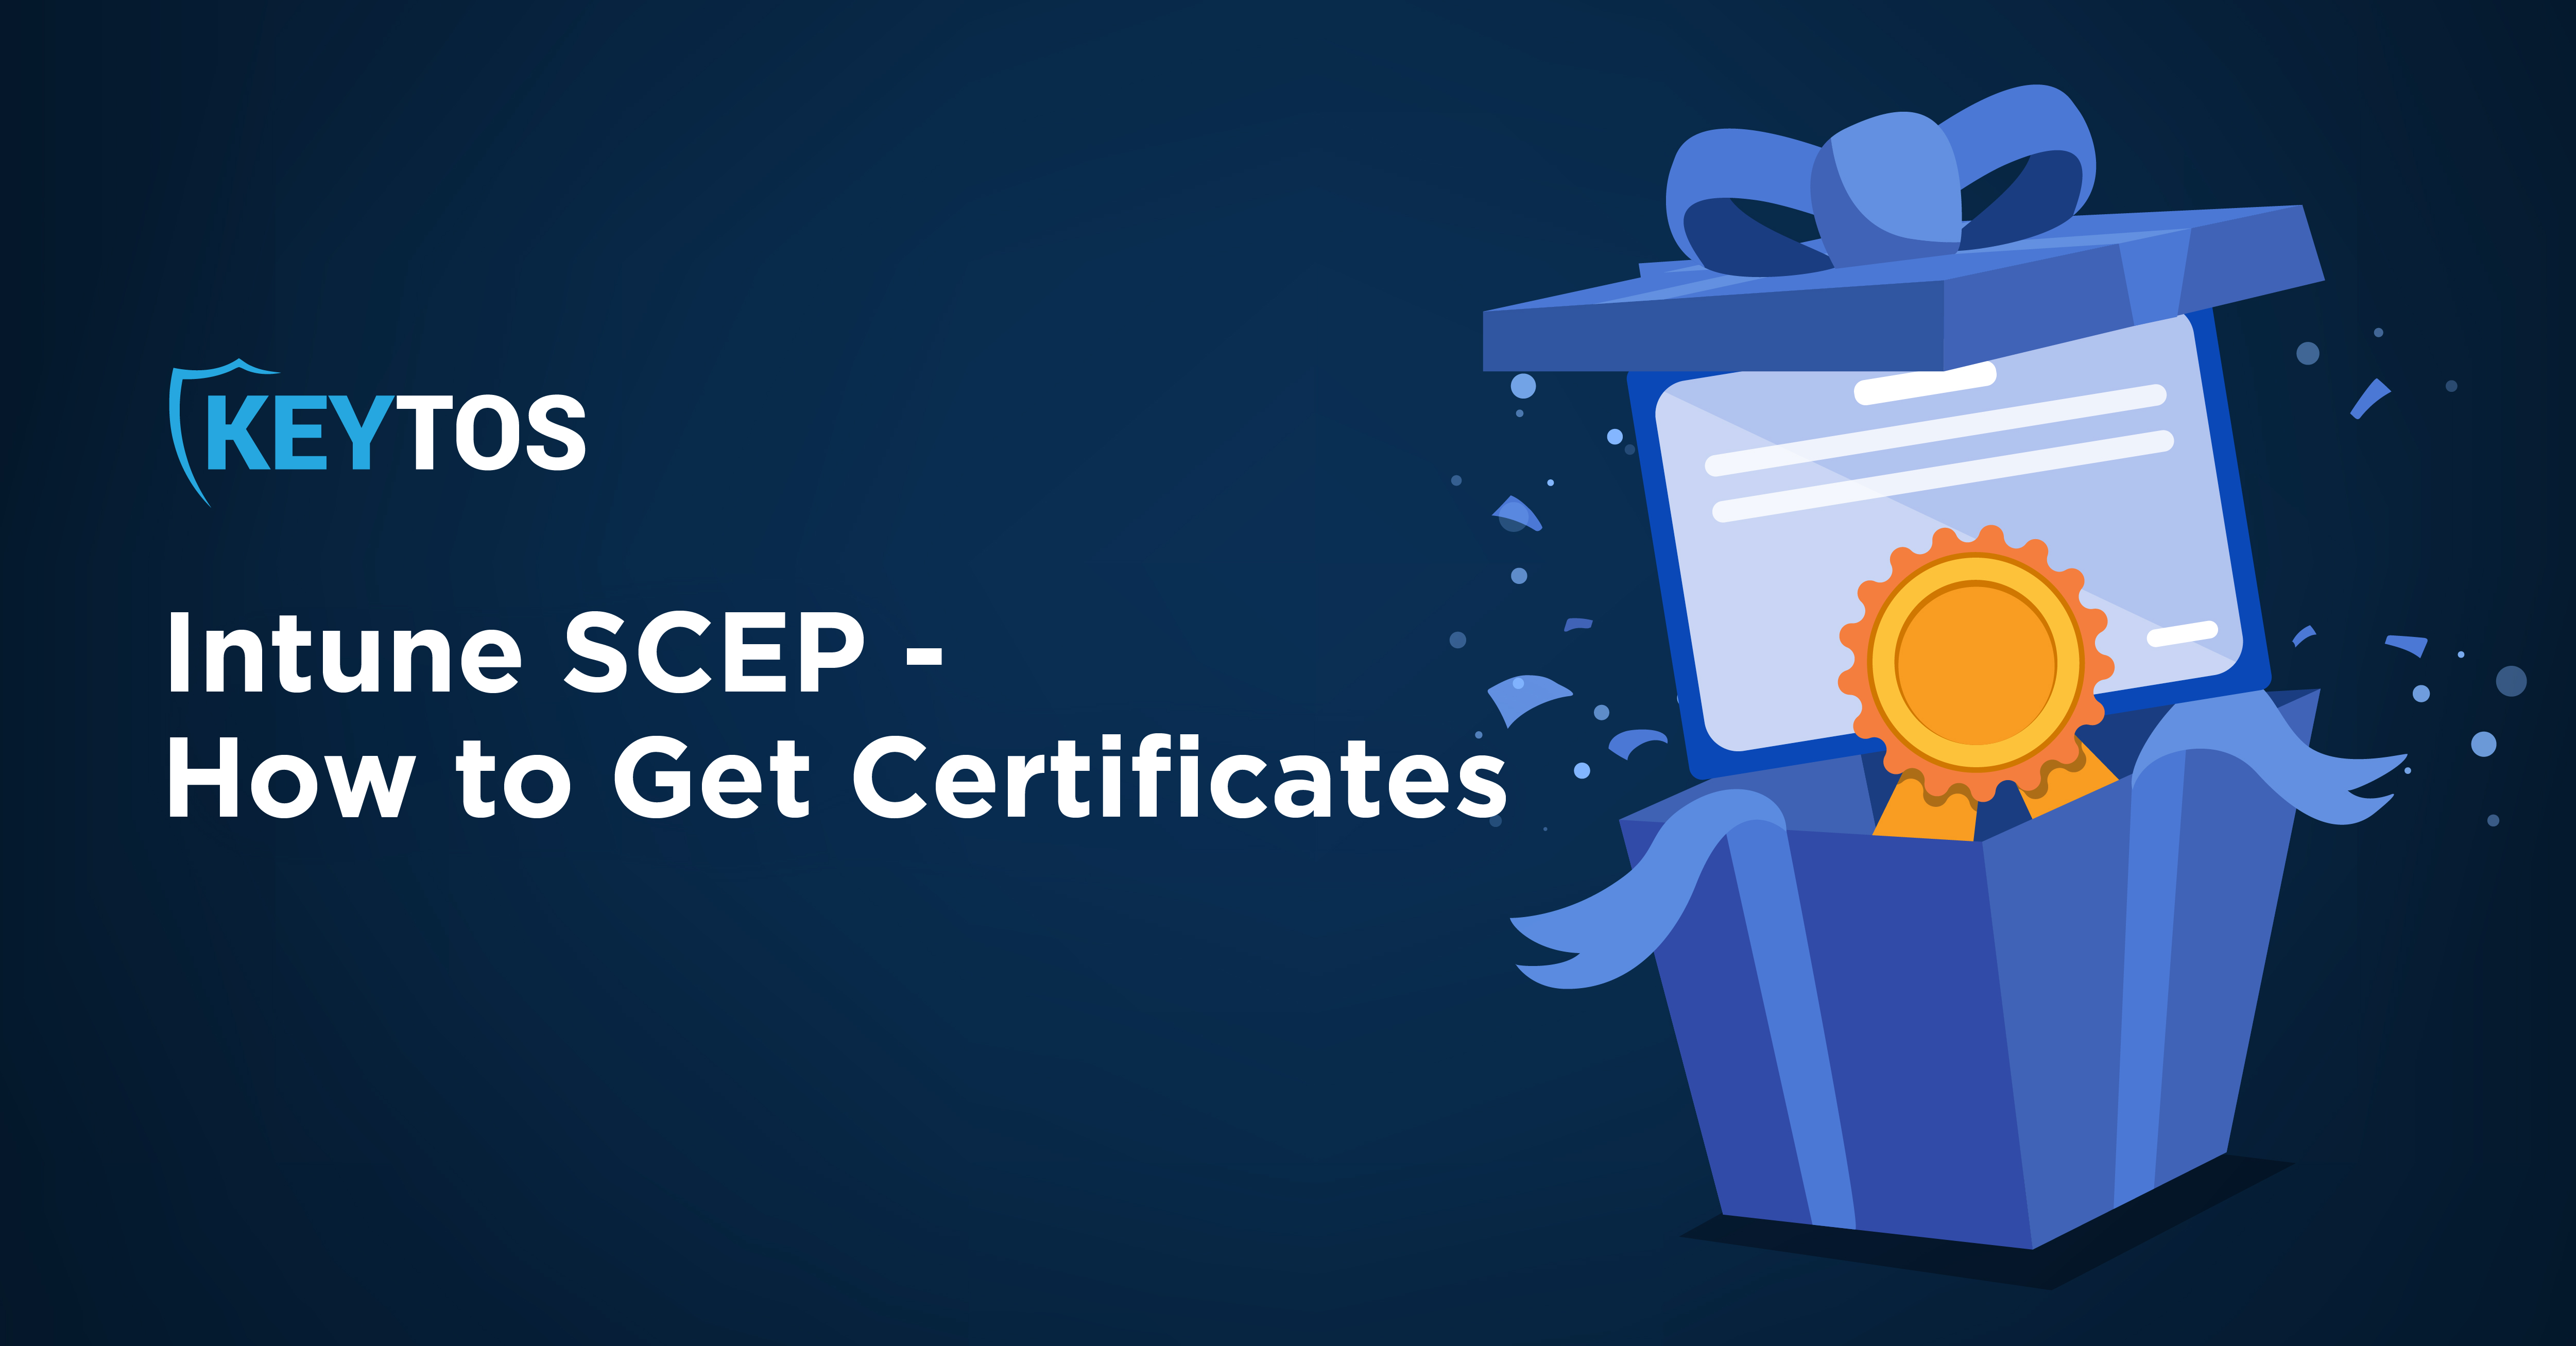 How to Get SSL Certificates with Intune SCEP